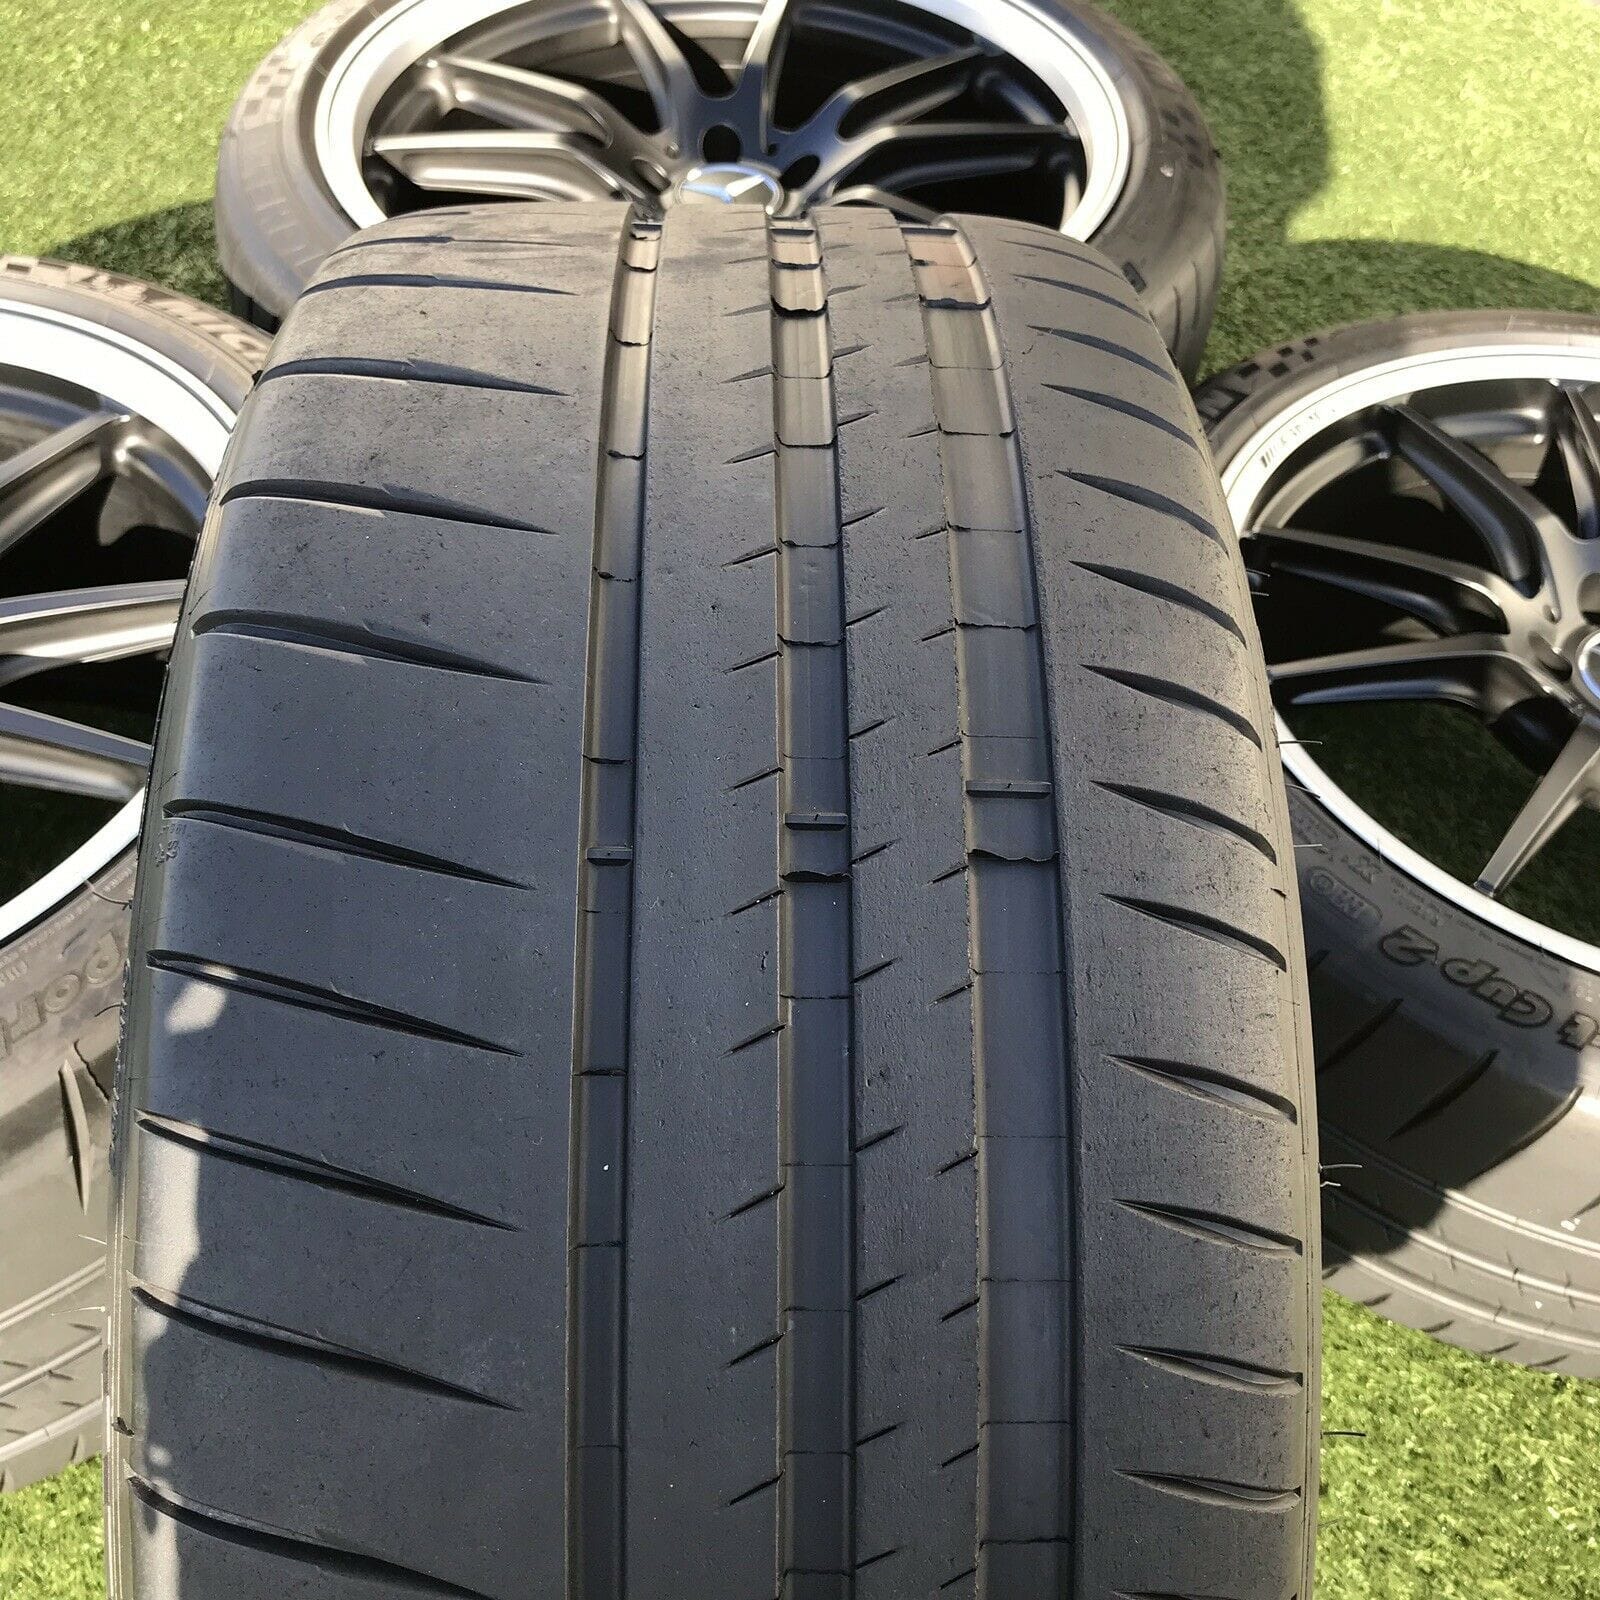 Wheels and Tires/Axles - 2019 - 19" 20" Mercedes AMG OEM Wheels & Tires for GTR GTS GT GTC - RARE APPTECH SET - New - Corona, CA 92882, United States